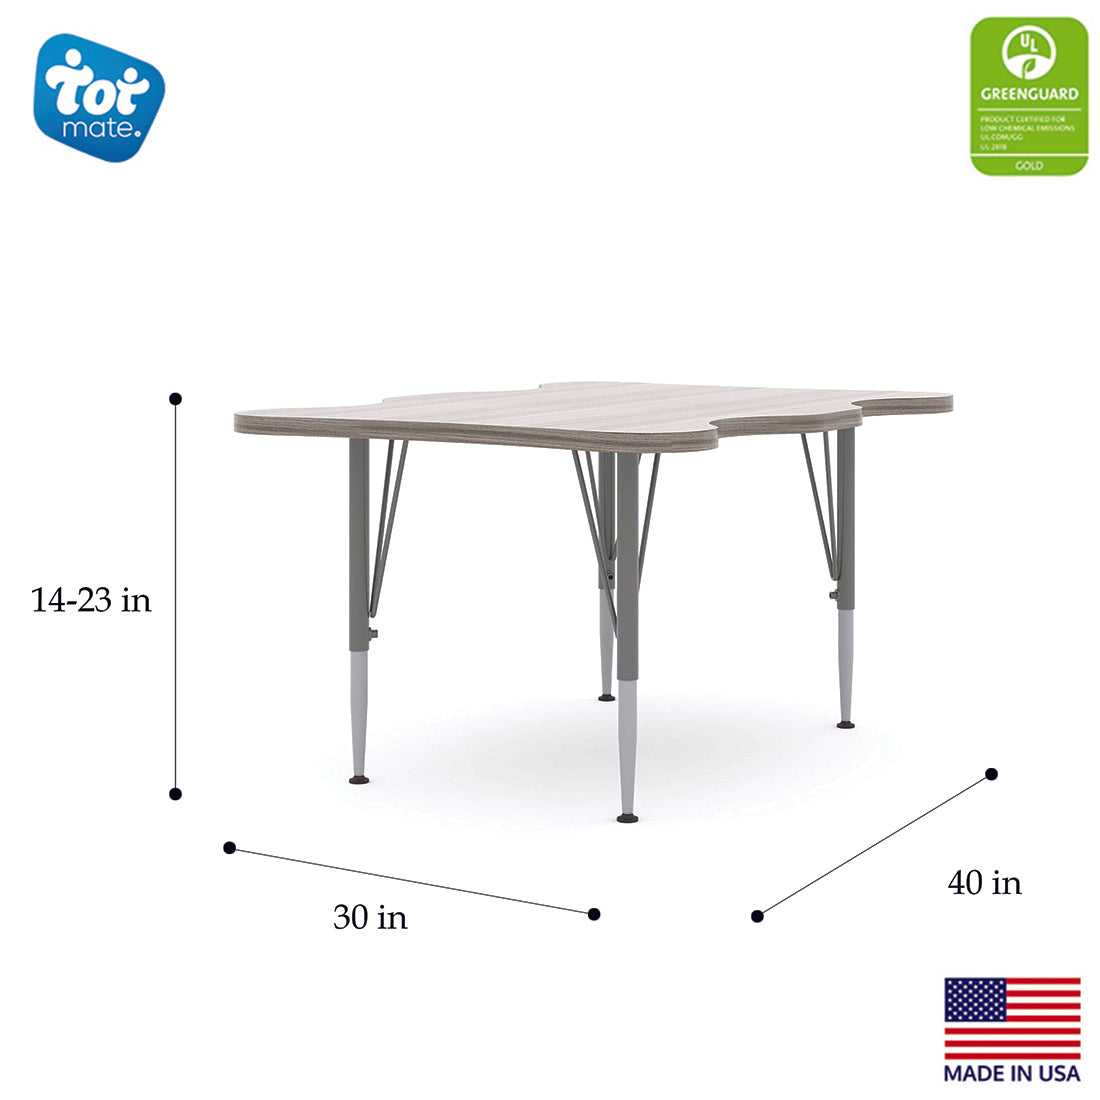 My Place Rectangular Table - 4 seat 40" Wide